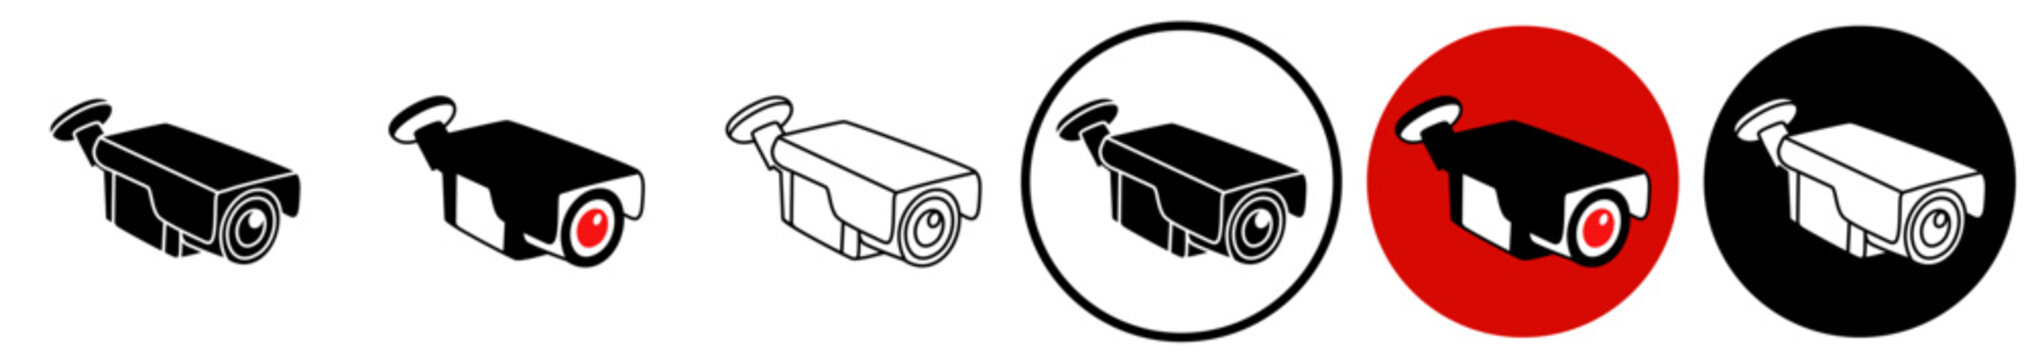 set High technology security CCTV icon sign. Safety camera security pictogram logo design vector illustrations